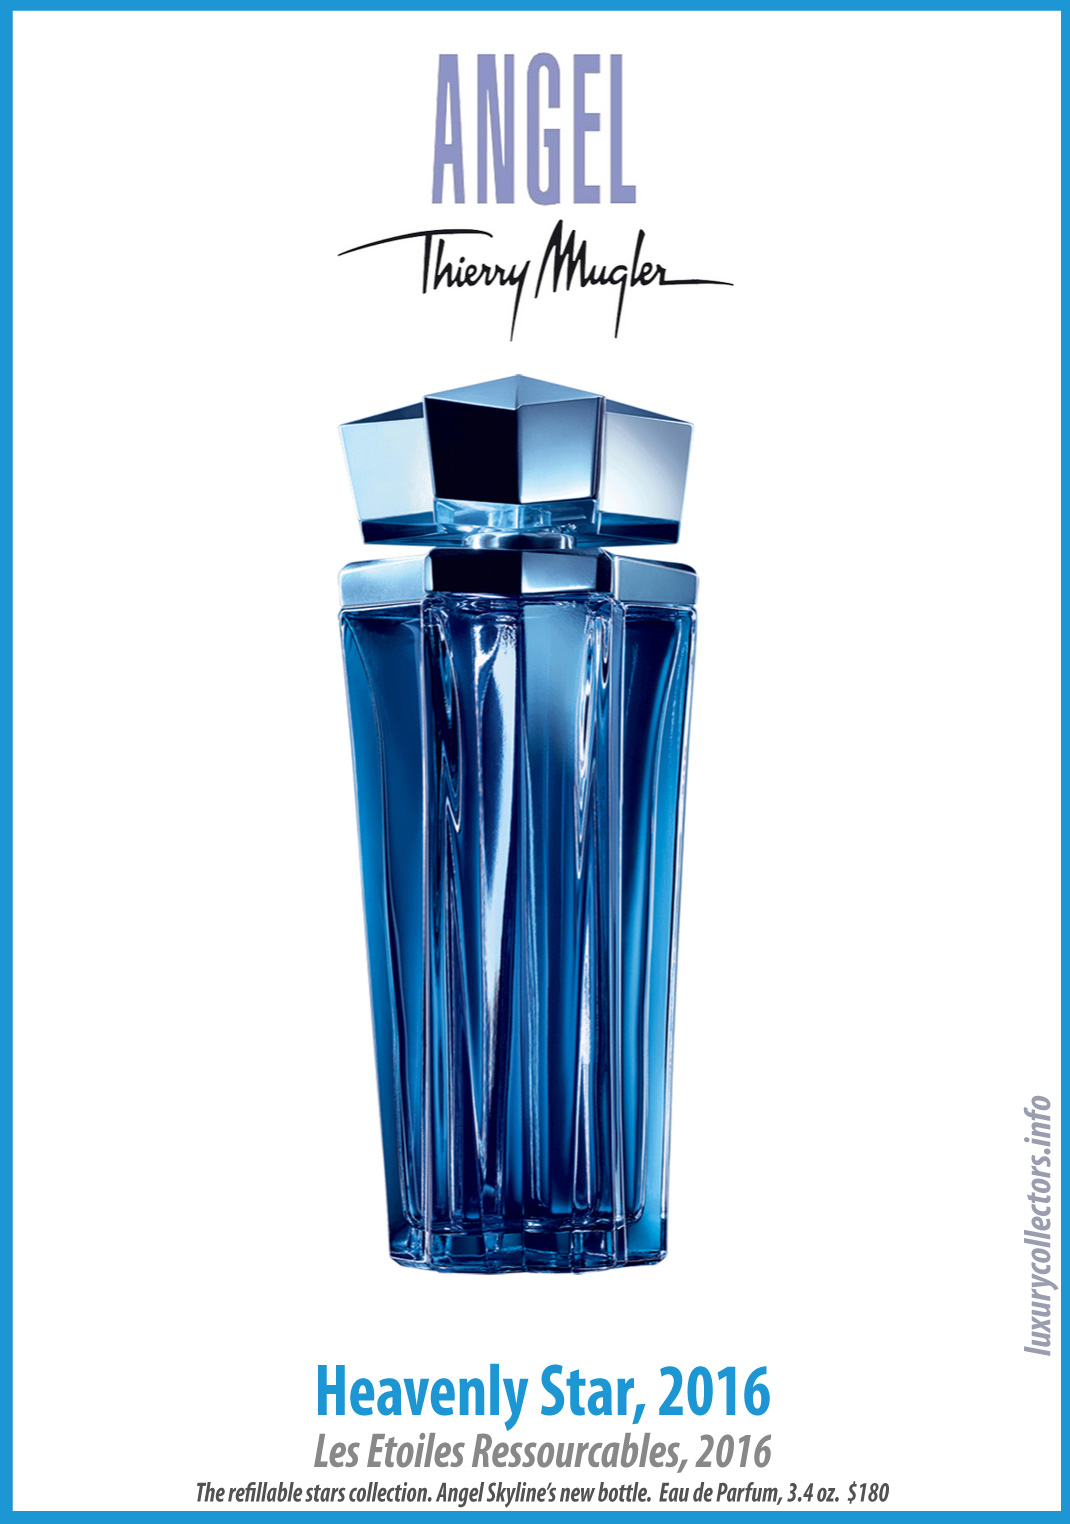 Thierry Mugler Angel Perfume Collector's Limited Edition Bottle 2016 Heavenly Star